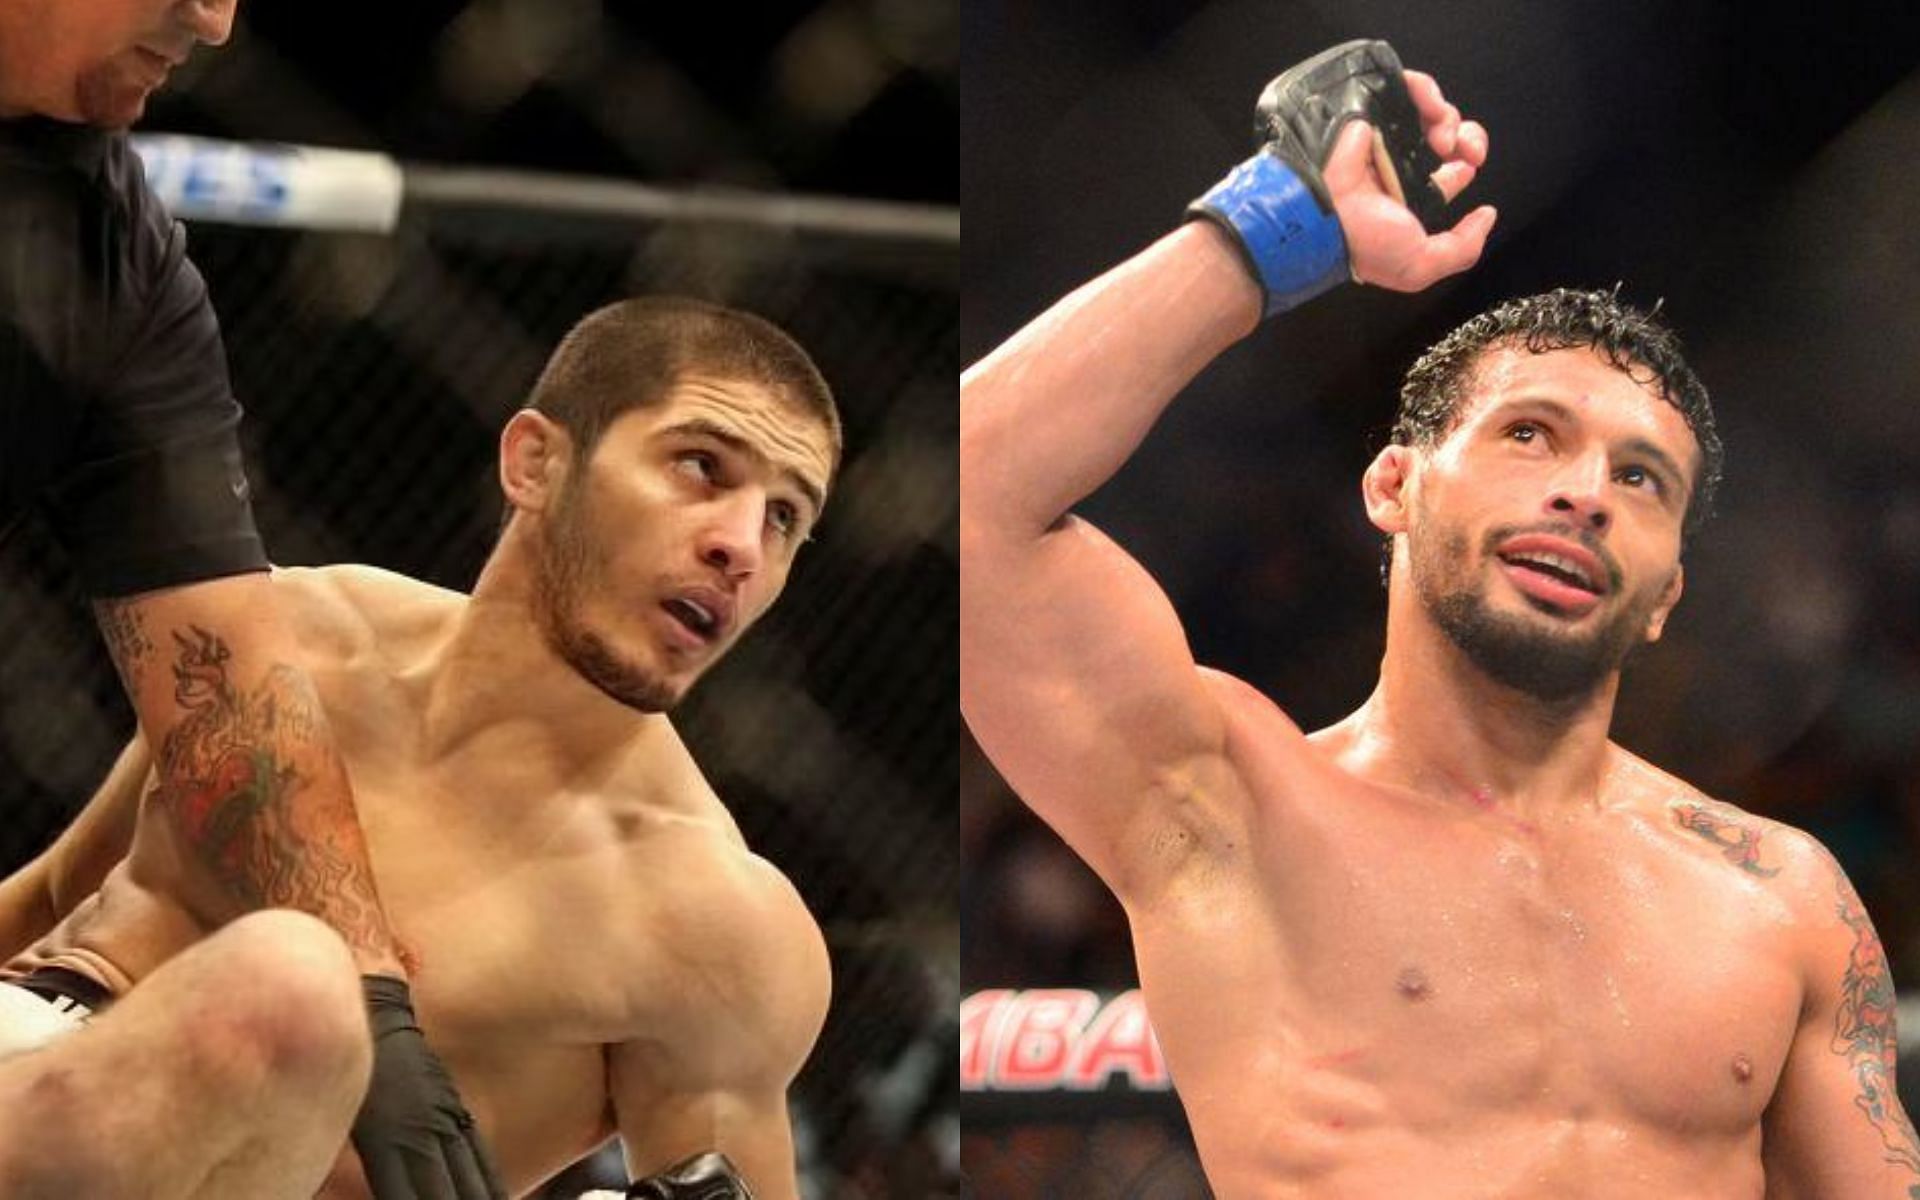 Islam Makhachev (left), Adriano Martins (right) [Images courtesy of @MMAHistoryToday and @MMAFighting on Twitter]